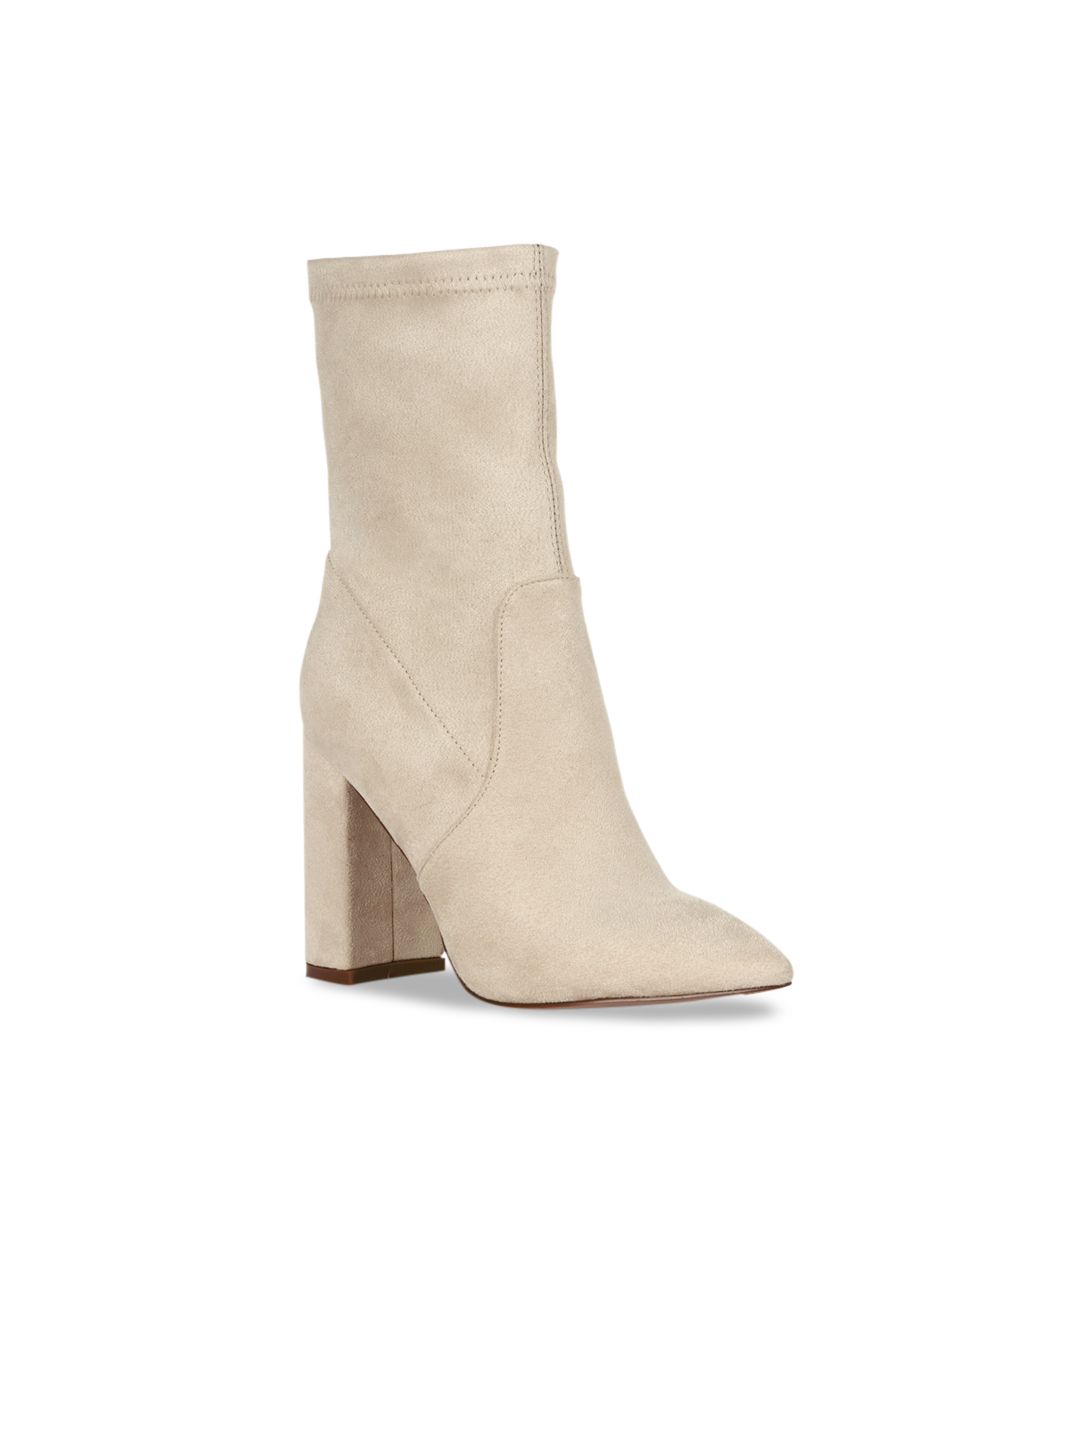 London Rag Beige Suede Party Block Heeled Boots Price in India